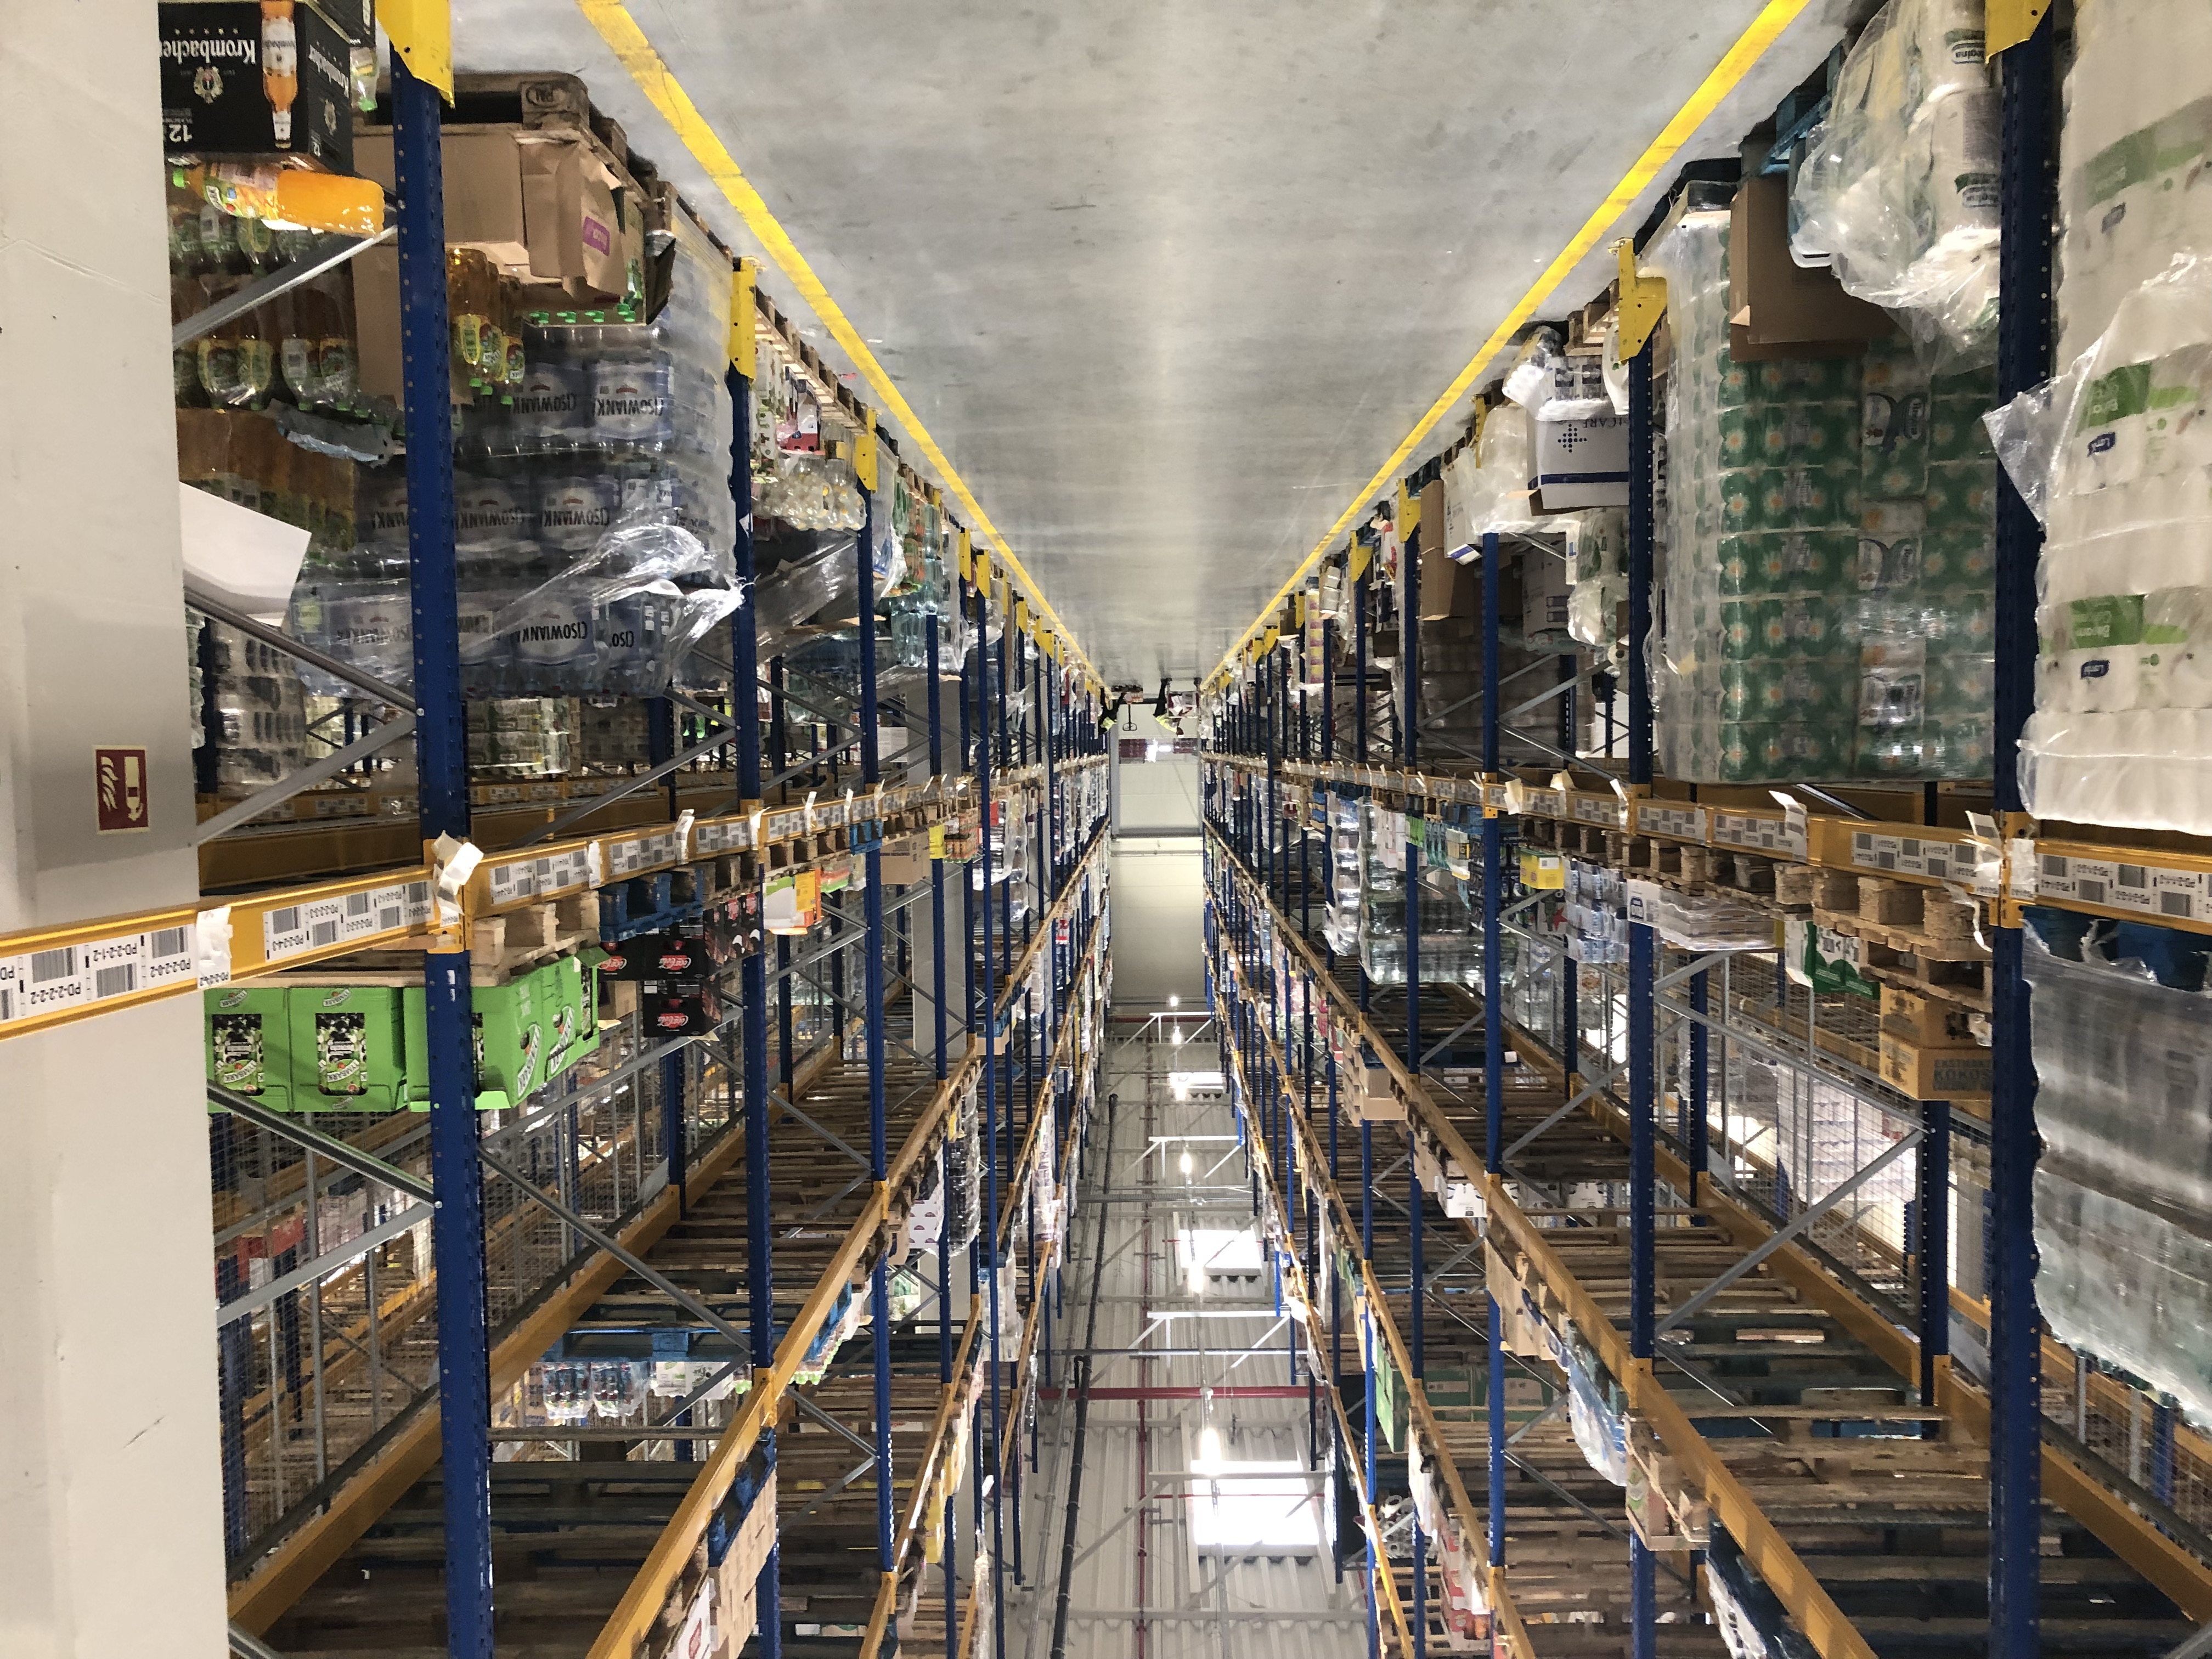 view down aisle in warehouse with materials stacked